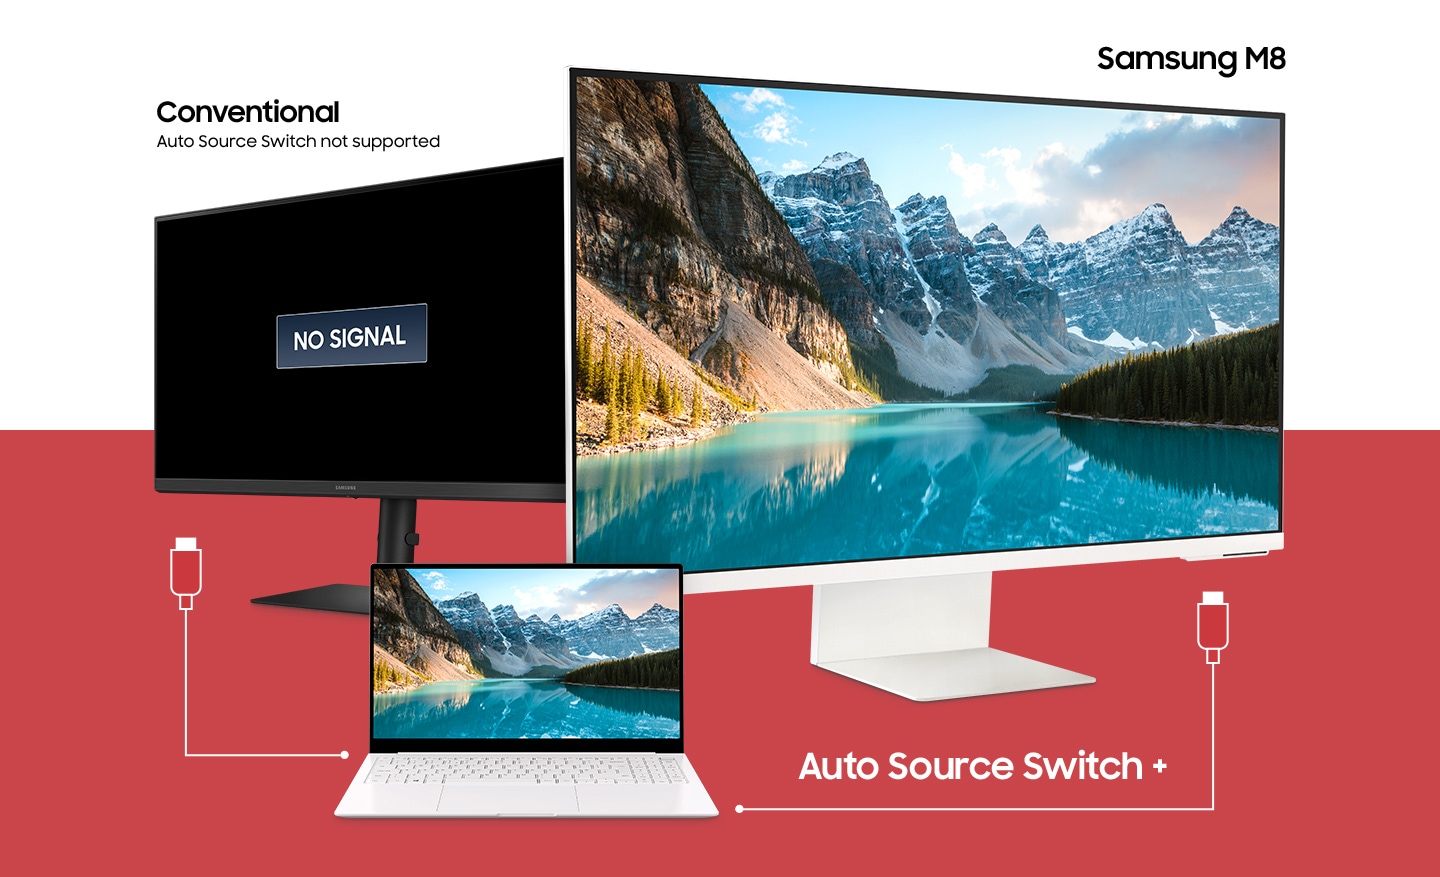 A laptop sits in between two monitors. The laptop has two different cables attempting to connect to the monitors. Above the left monitor, the text "Conventional, Auto Source Switch not supported" appears and a "No Signal" icon appears on the screen. Above the right monitor shows the text "Samsung M8" and a mountainous scene appears on the screen due to the Auto Source Switch+ functionality.